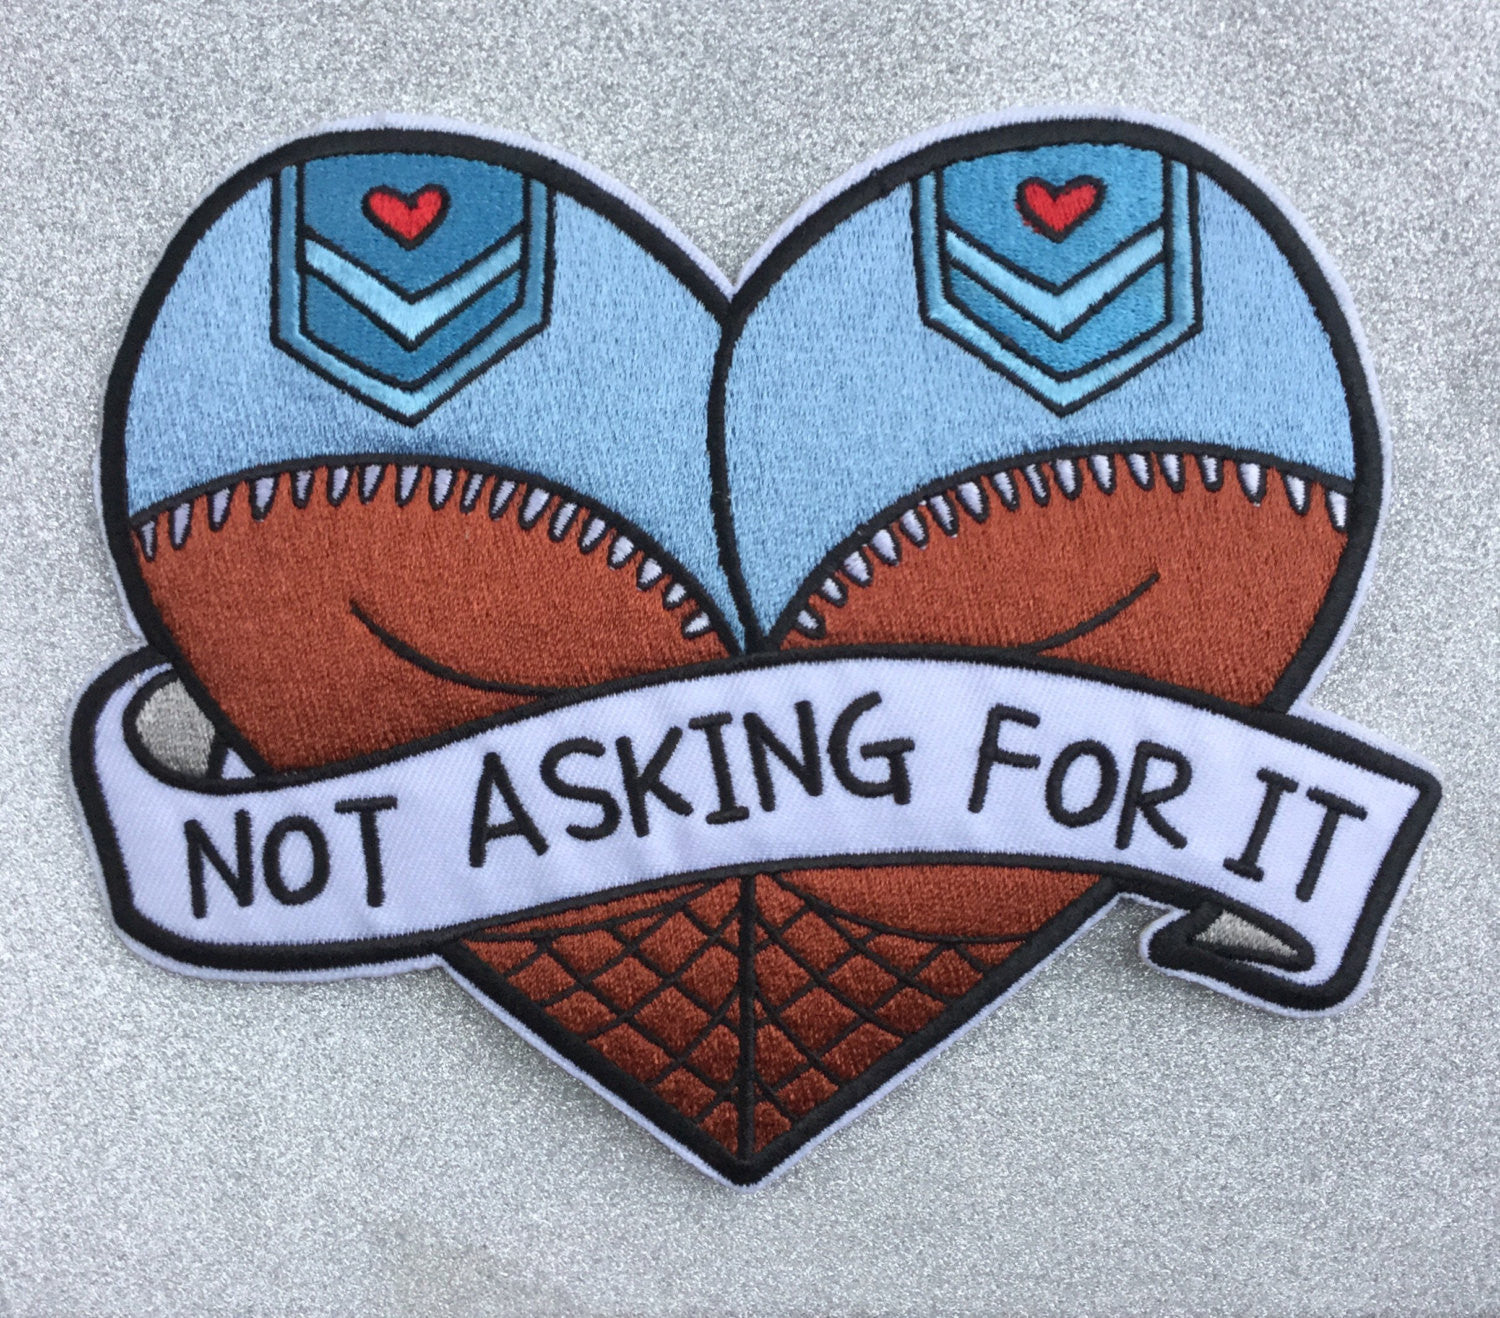 Not asking for it patch - Radical Buttons